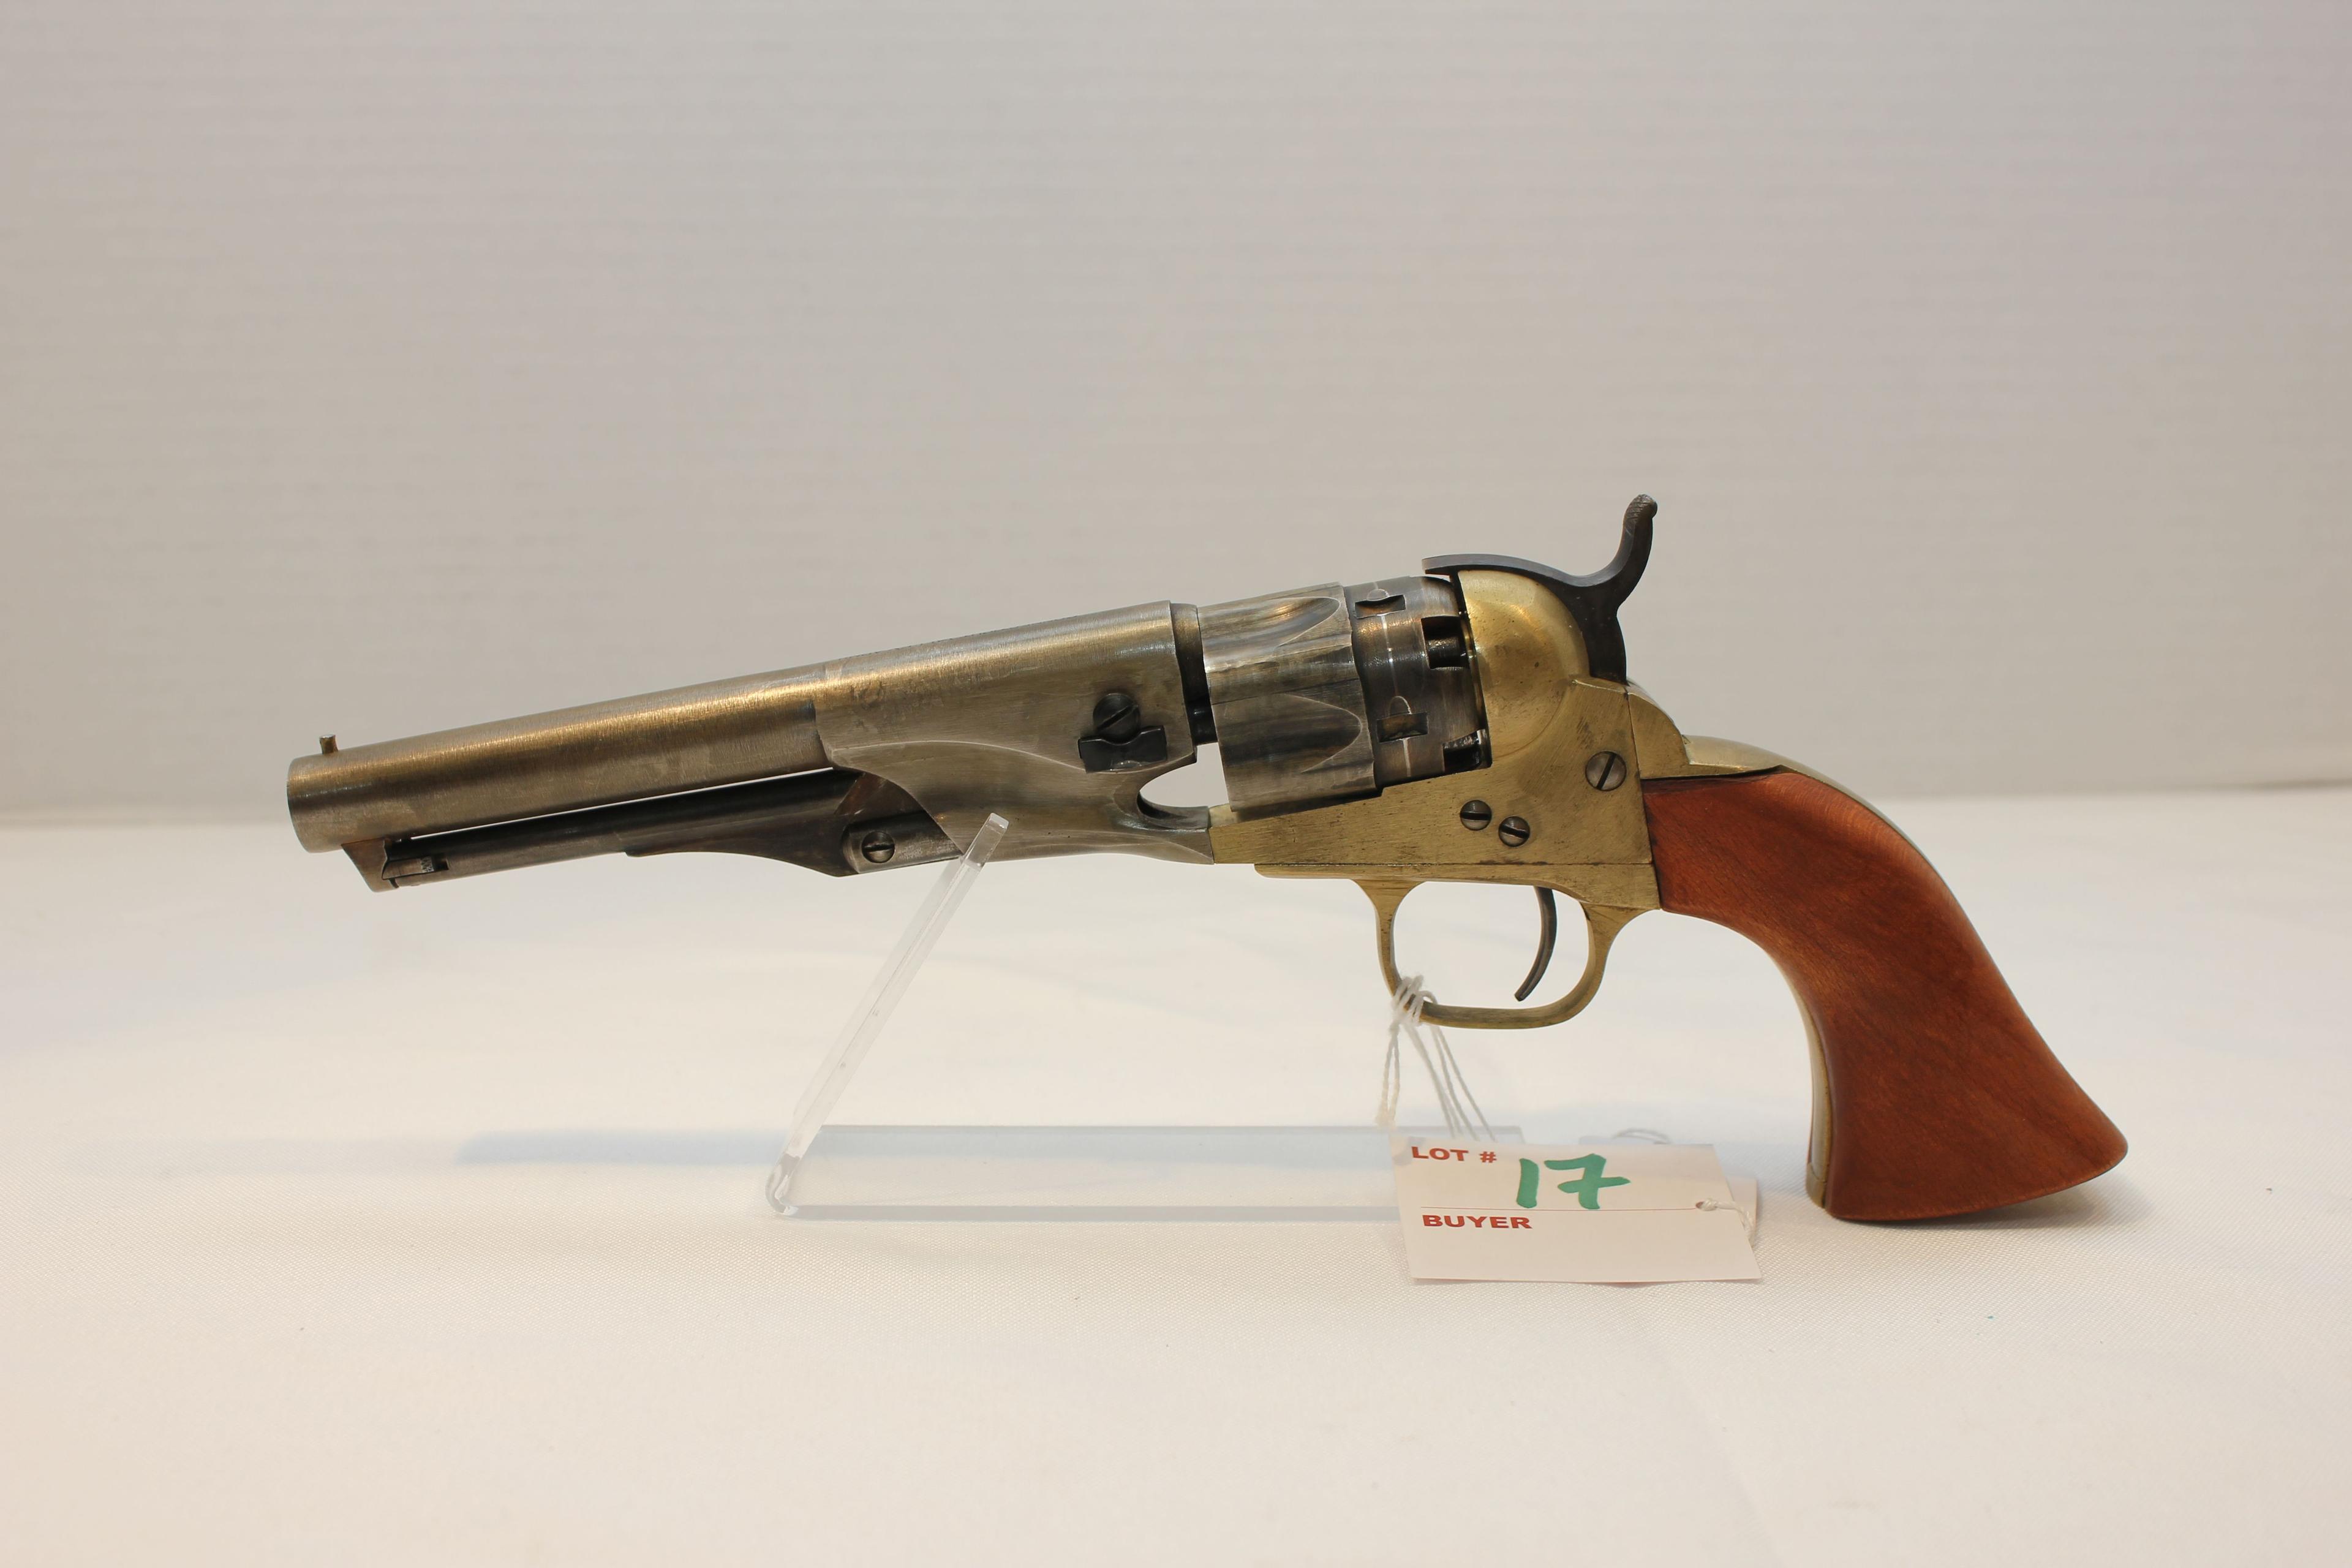 CVA .40 Cal. Muzzle-Loading 6-Shot Single Action Revolver w/5-1/2" BBL, Brass Frame and Handle; Made